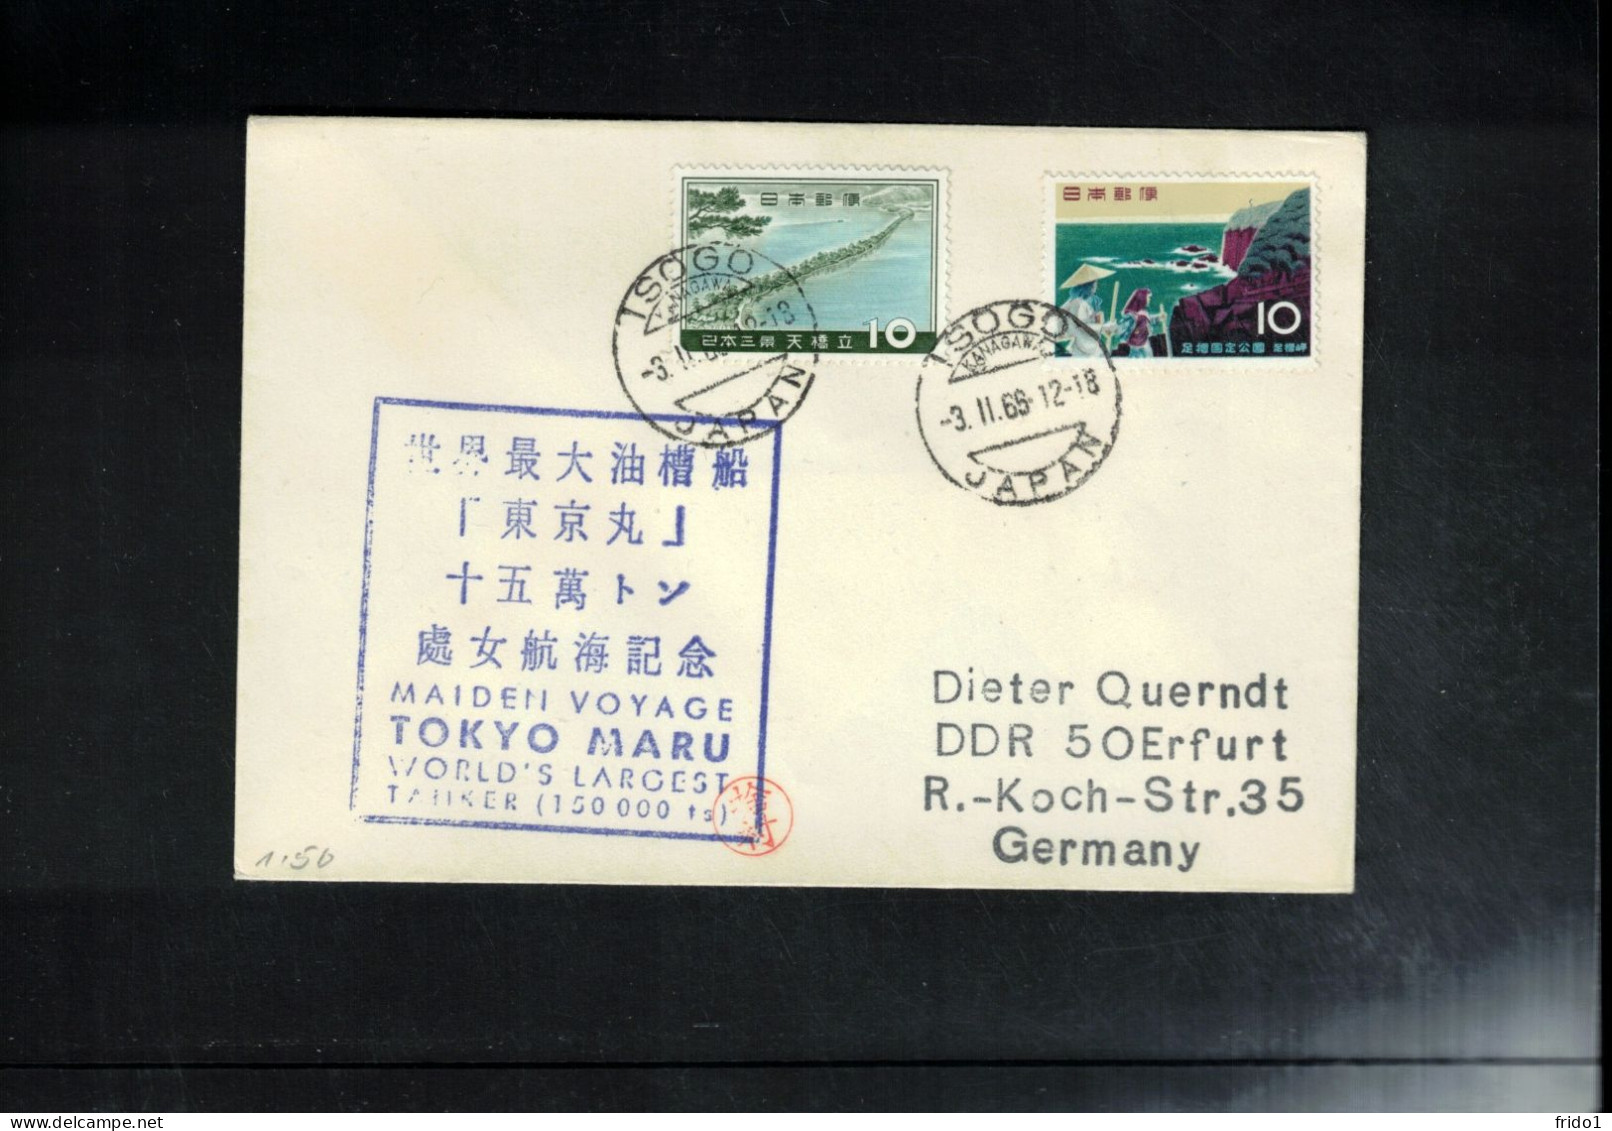 Japan 1966 Maiden Voyage Of TOKYO MARU World's Largest Tanker Interesting Cover - Lettres & Documents